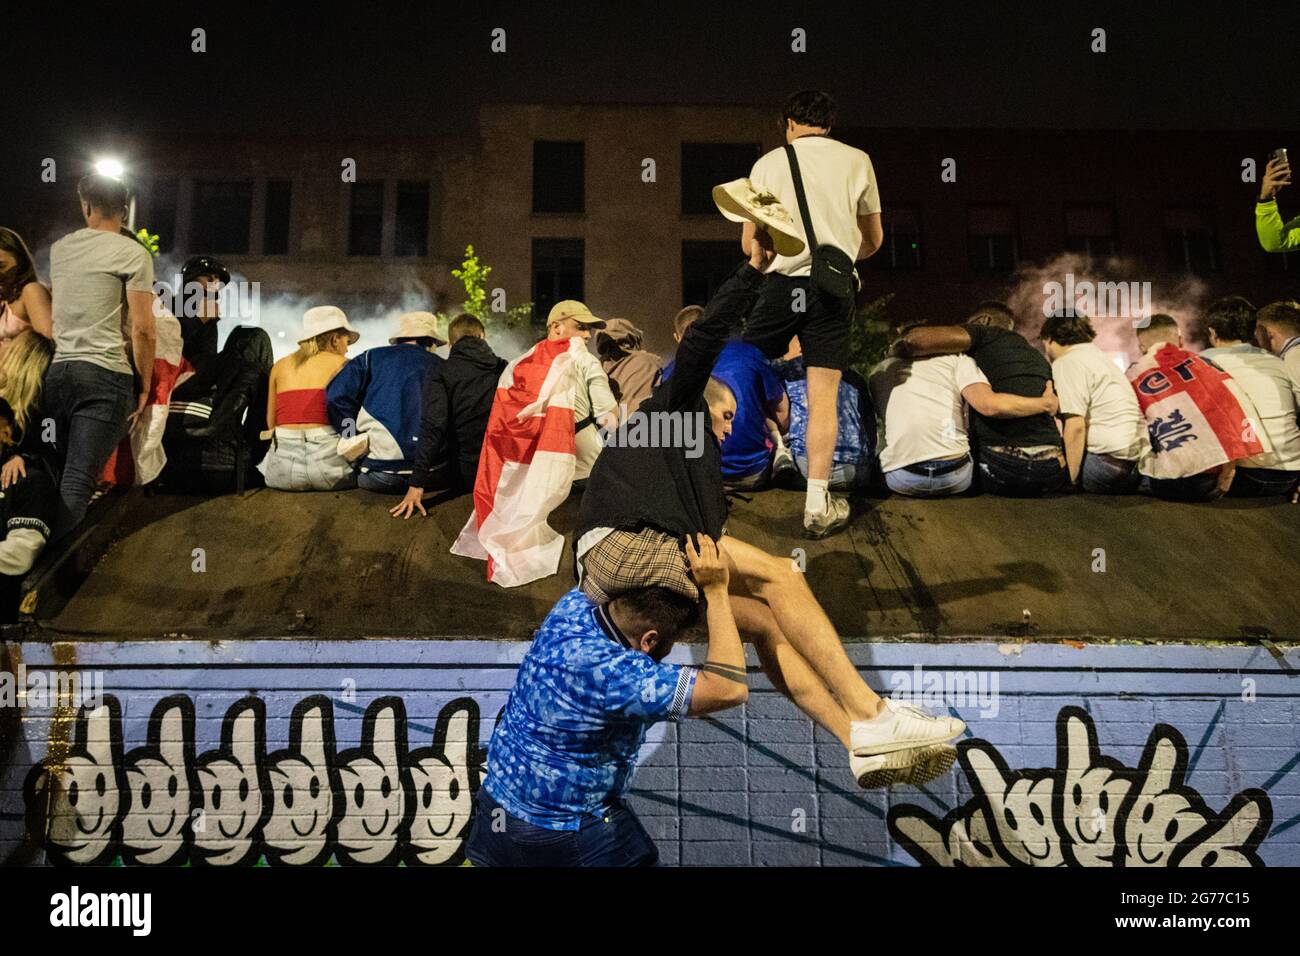 Manchester, UK. 11th July, 2021. A man helps a fellow England fan up to celebrate regardless of losing against Italy in the Euro2020 final.ÊAndy Barton/Alamy Live News Credit: Andy Barton/Alamy Live News Stock Photo